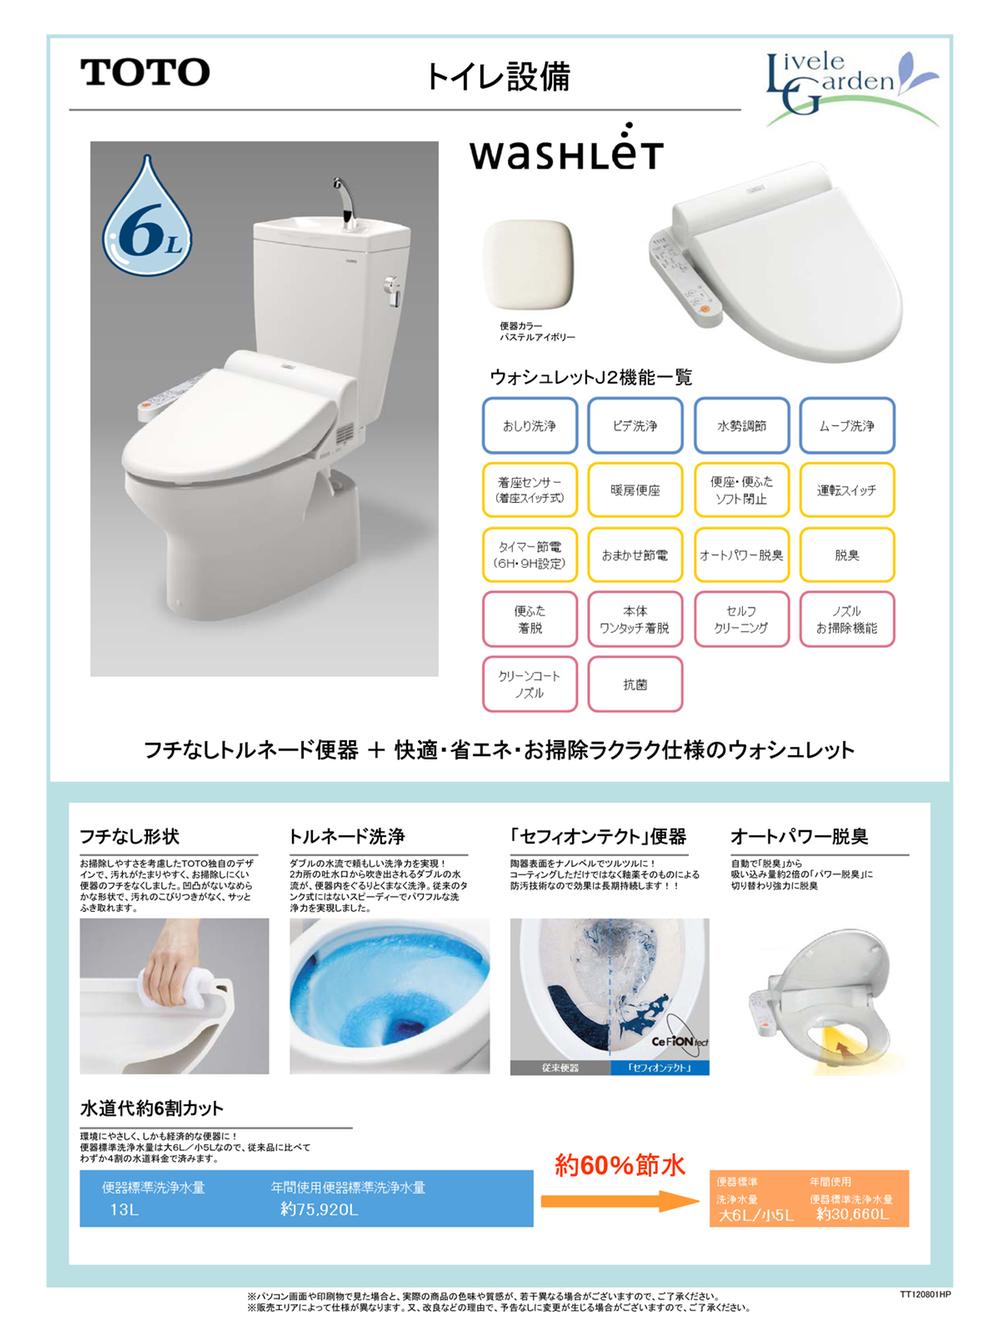 Other Equipment. Borderless shape in consideration of the cleaning ease. Tornado cleaning to wash all over the inside of the toilet bowl in the double of water flow. The pottery surface was coated in slippery at the nano-level "Sefi on Detect" toilet bowl. Automatically from "deodorizing", Strongly deodorizing switches to "power deodorizing" suction amount twice the.